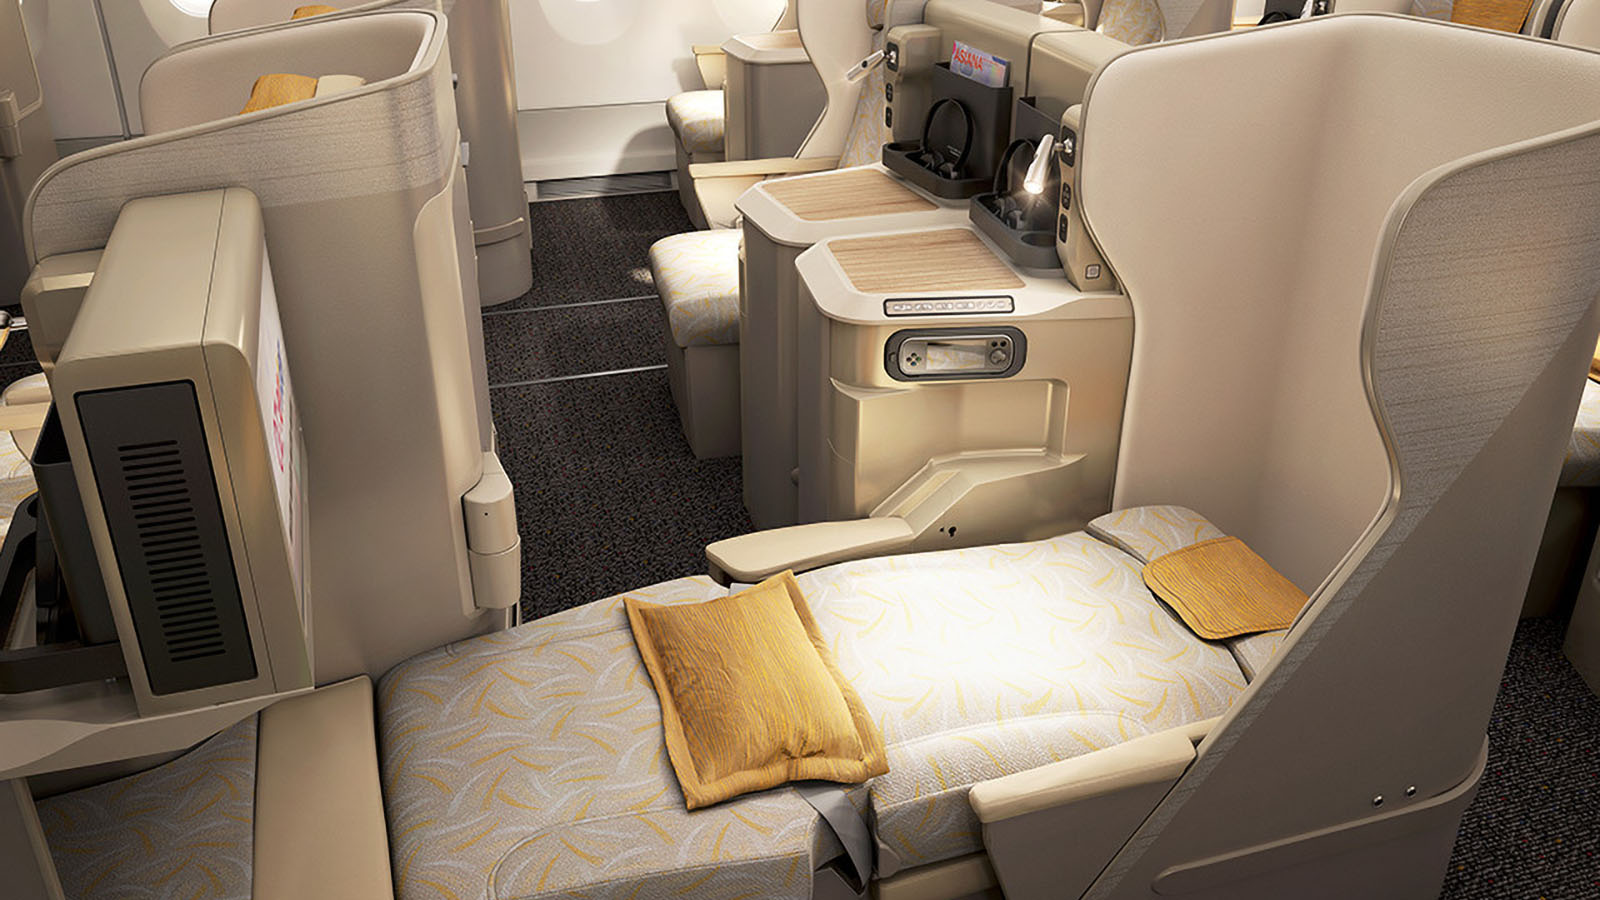 Business Class on Asiana Airlines' flights from Melbourne